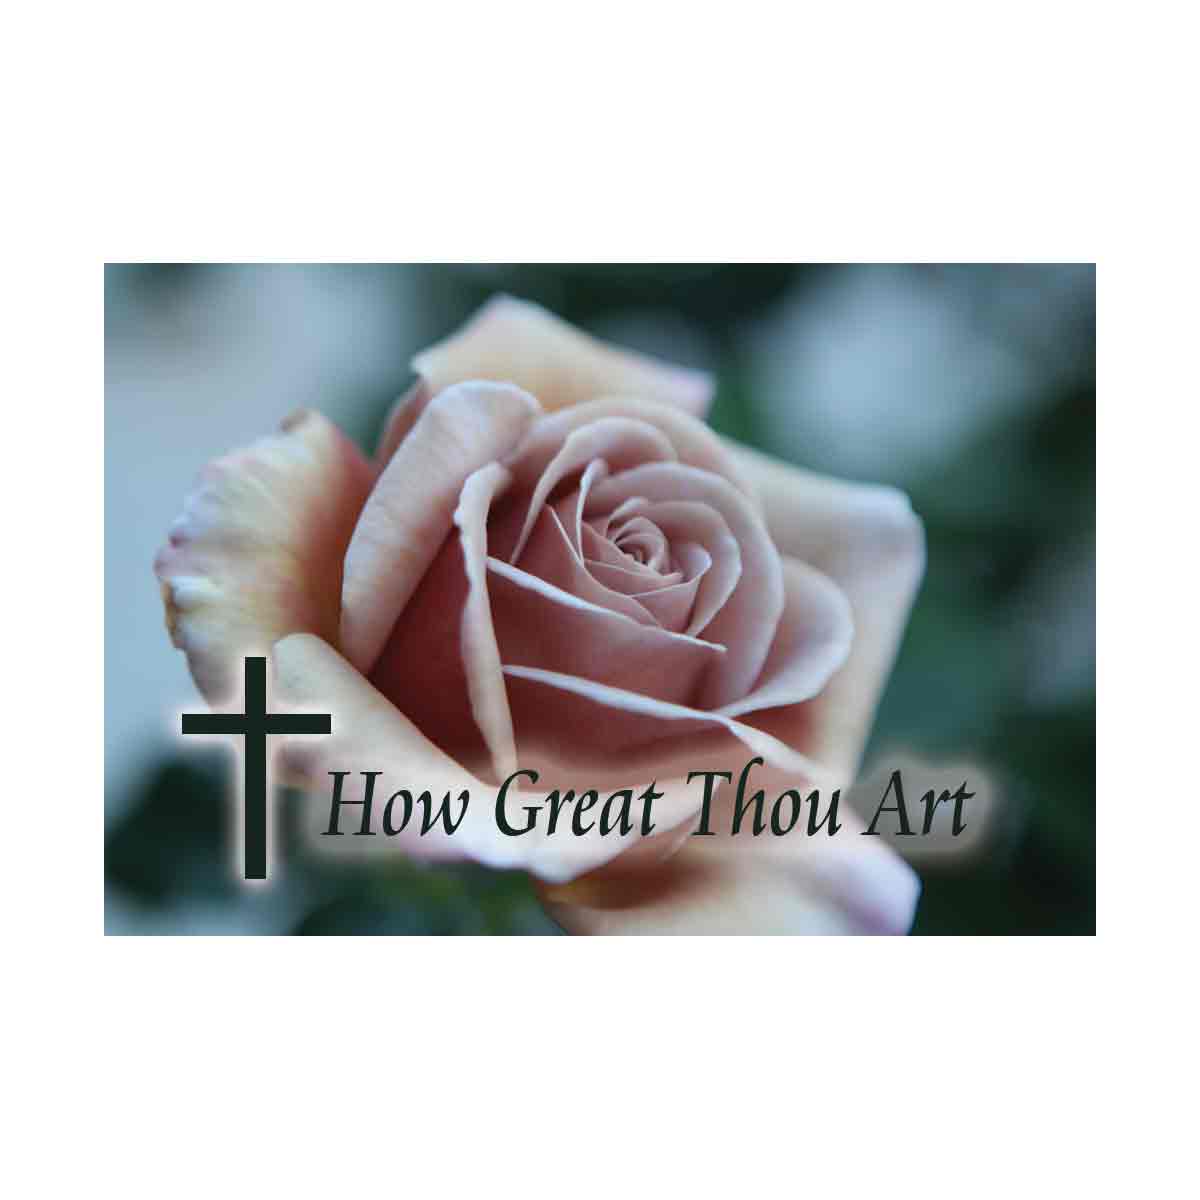 How Great Thou Art - Rose